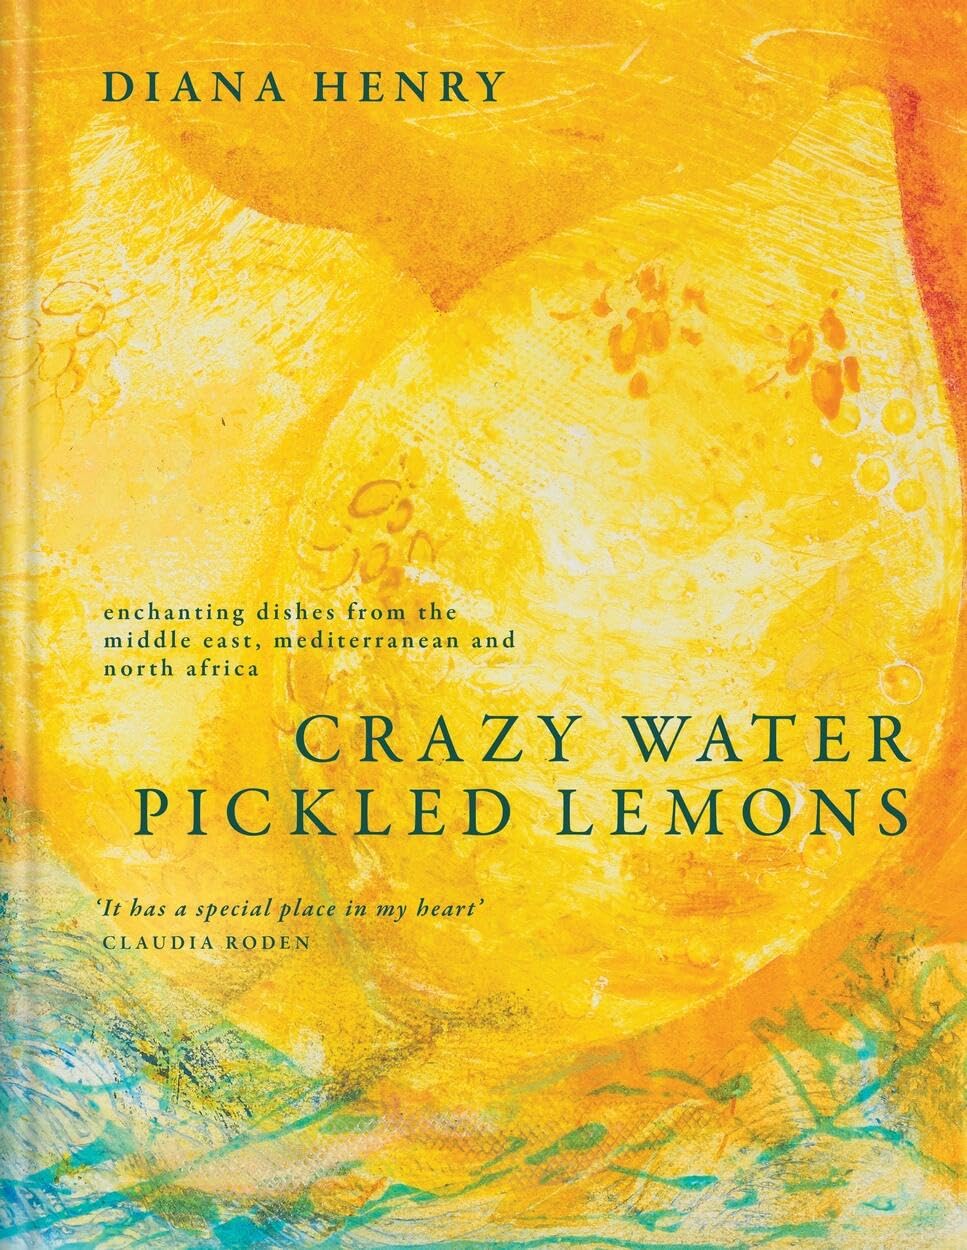 *Pre-order* Crazy Water, Pickled Lemons: Enchanting Dishes from the Middle East, Mediterranean and North Africa (Diana Henry)